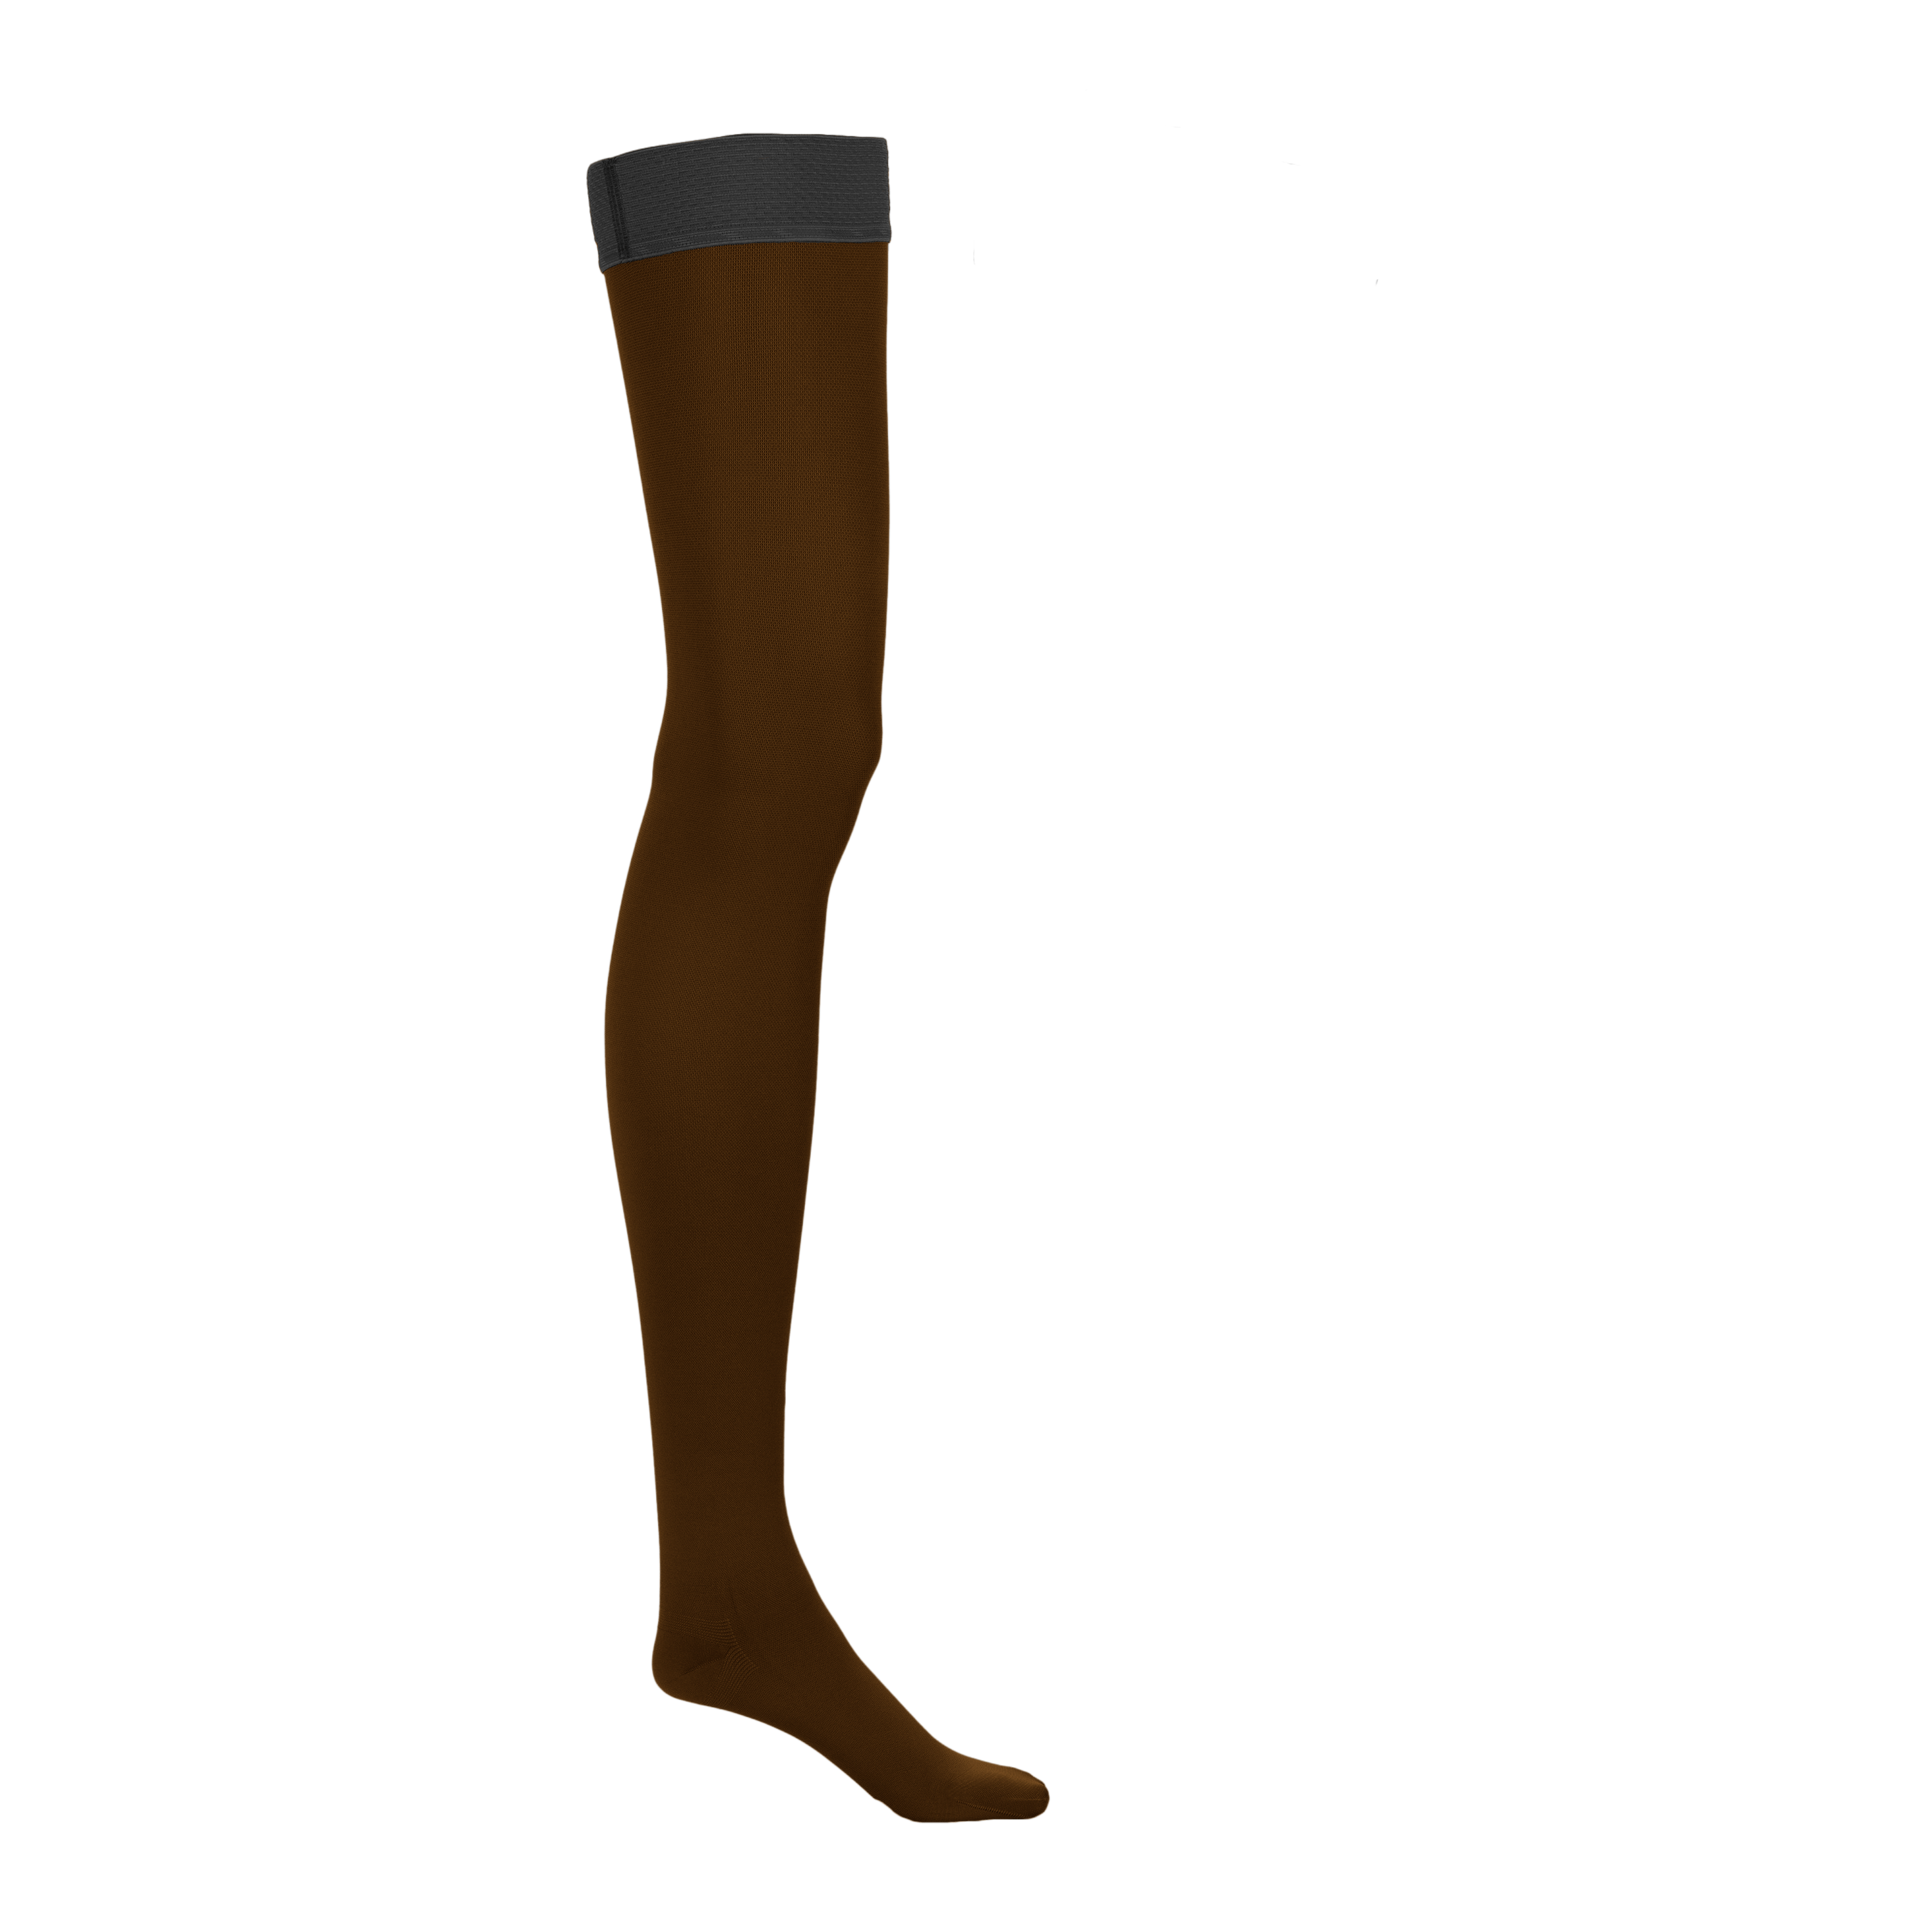 Compression Socks 20-30 mmgh Best for Varicose Veins Athletic Medical Nurse  Running Flight Travels Stocking Men Women Color: ZH106, Size: S M